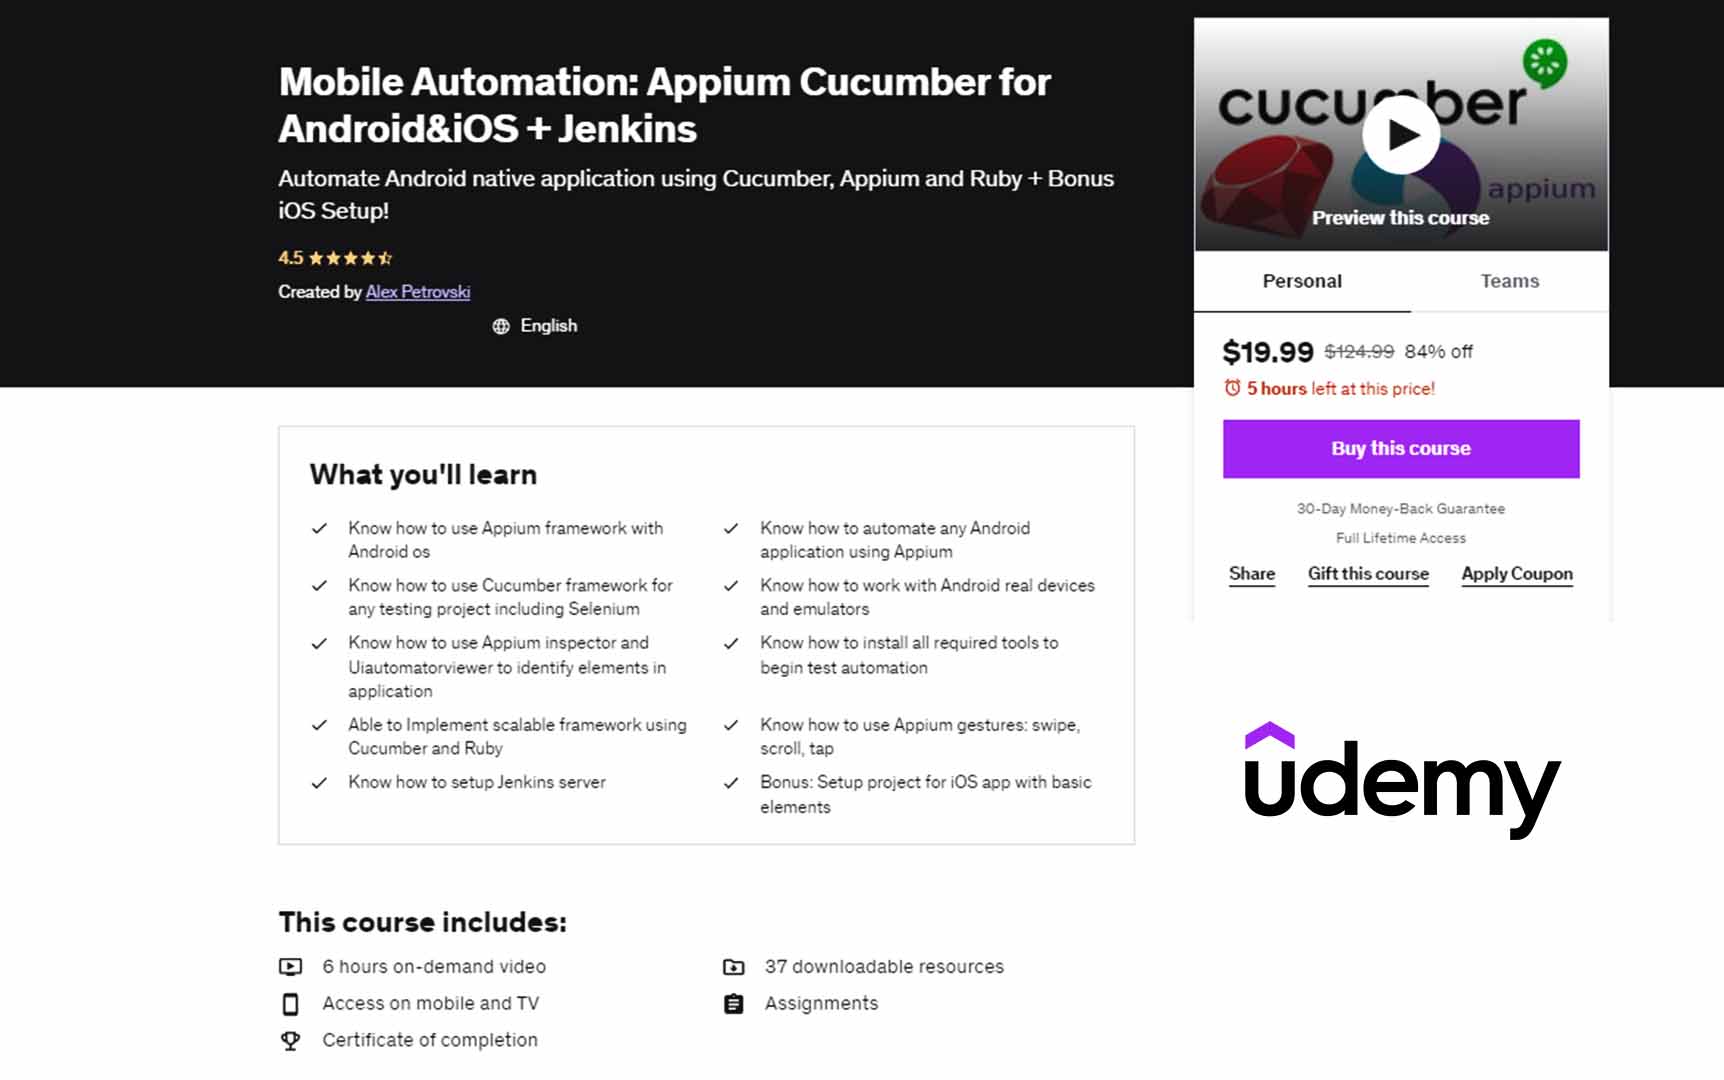 Mobile Automation: Appium Cucumber for Android&iOS + Jenkins